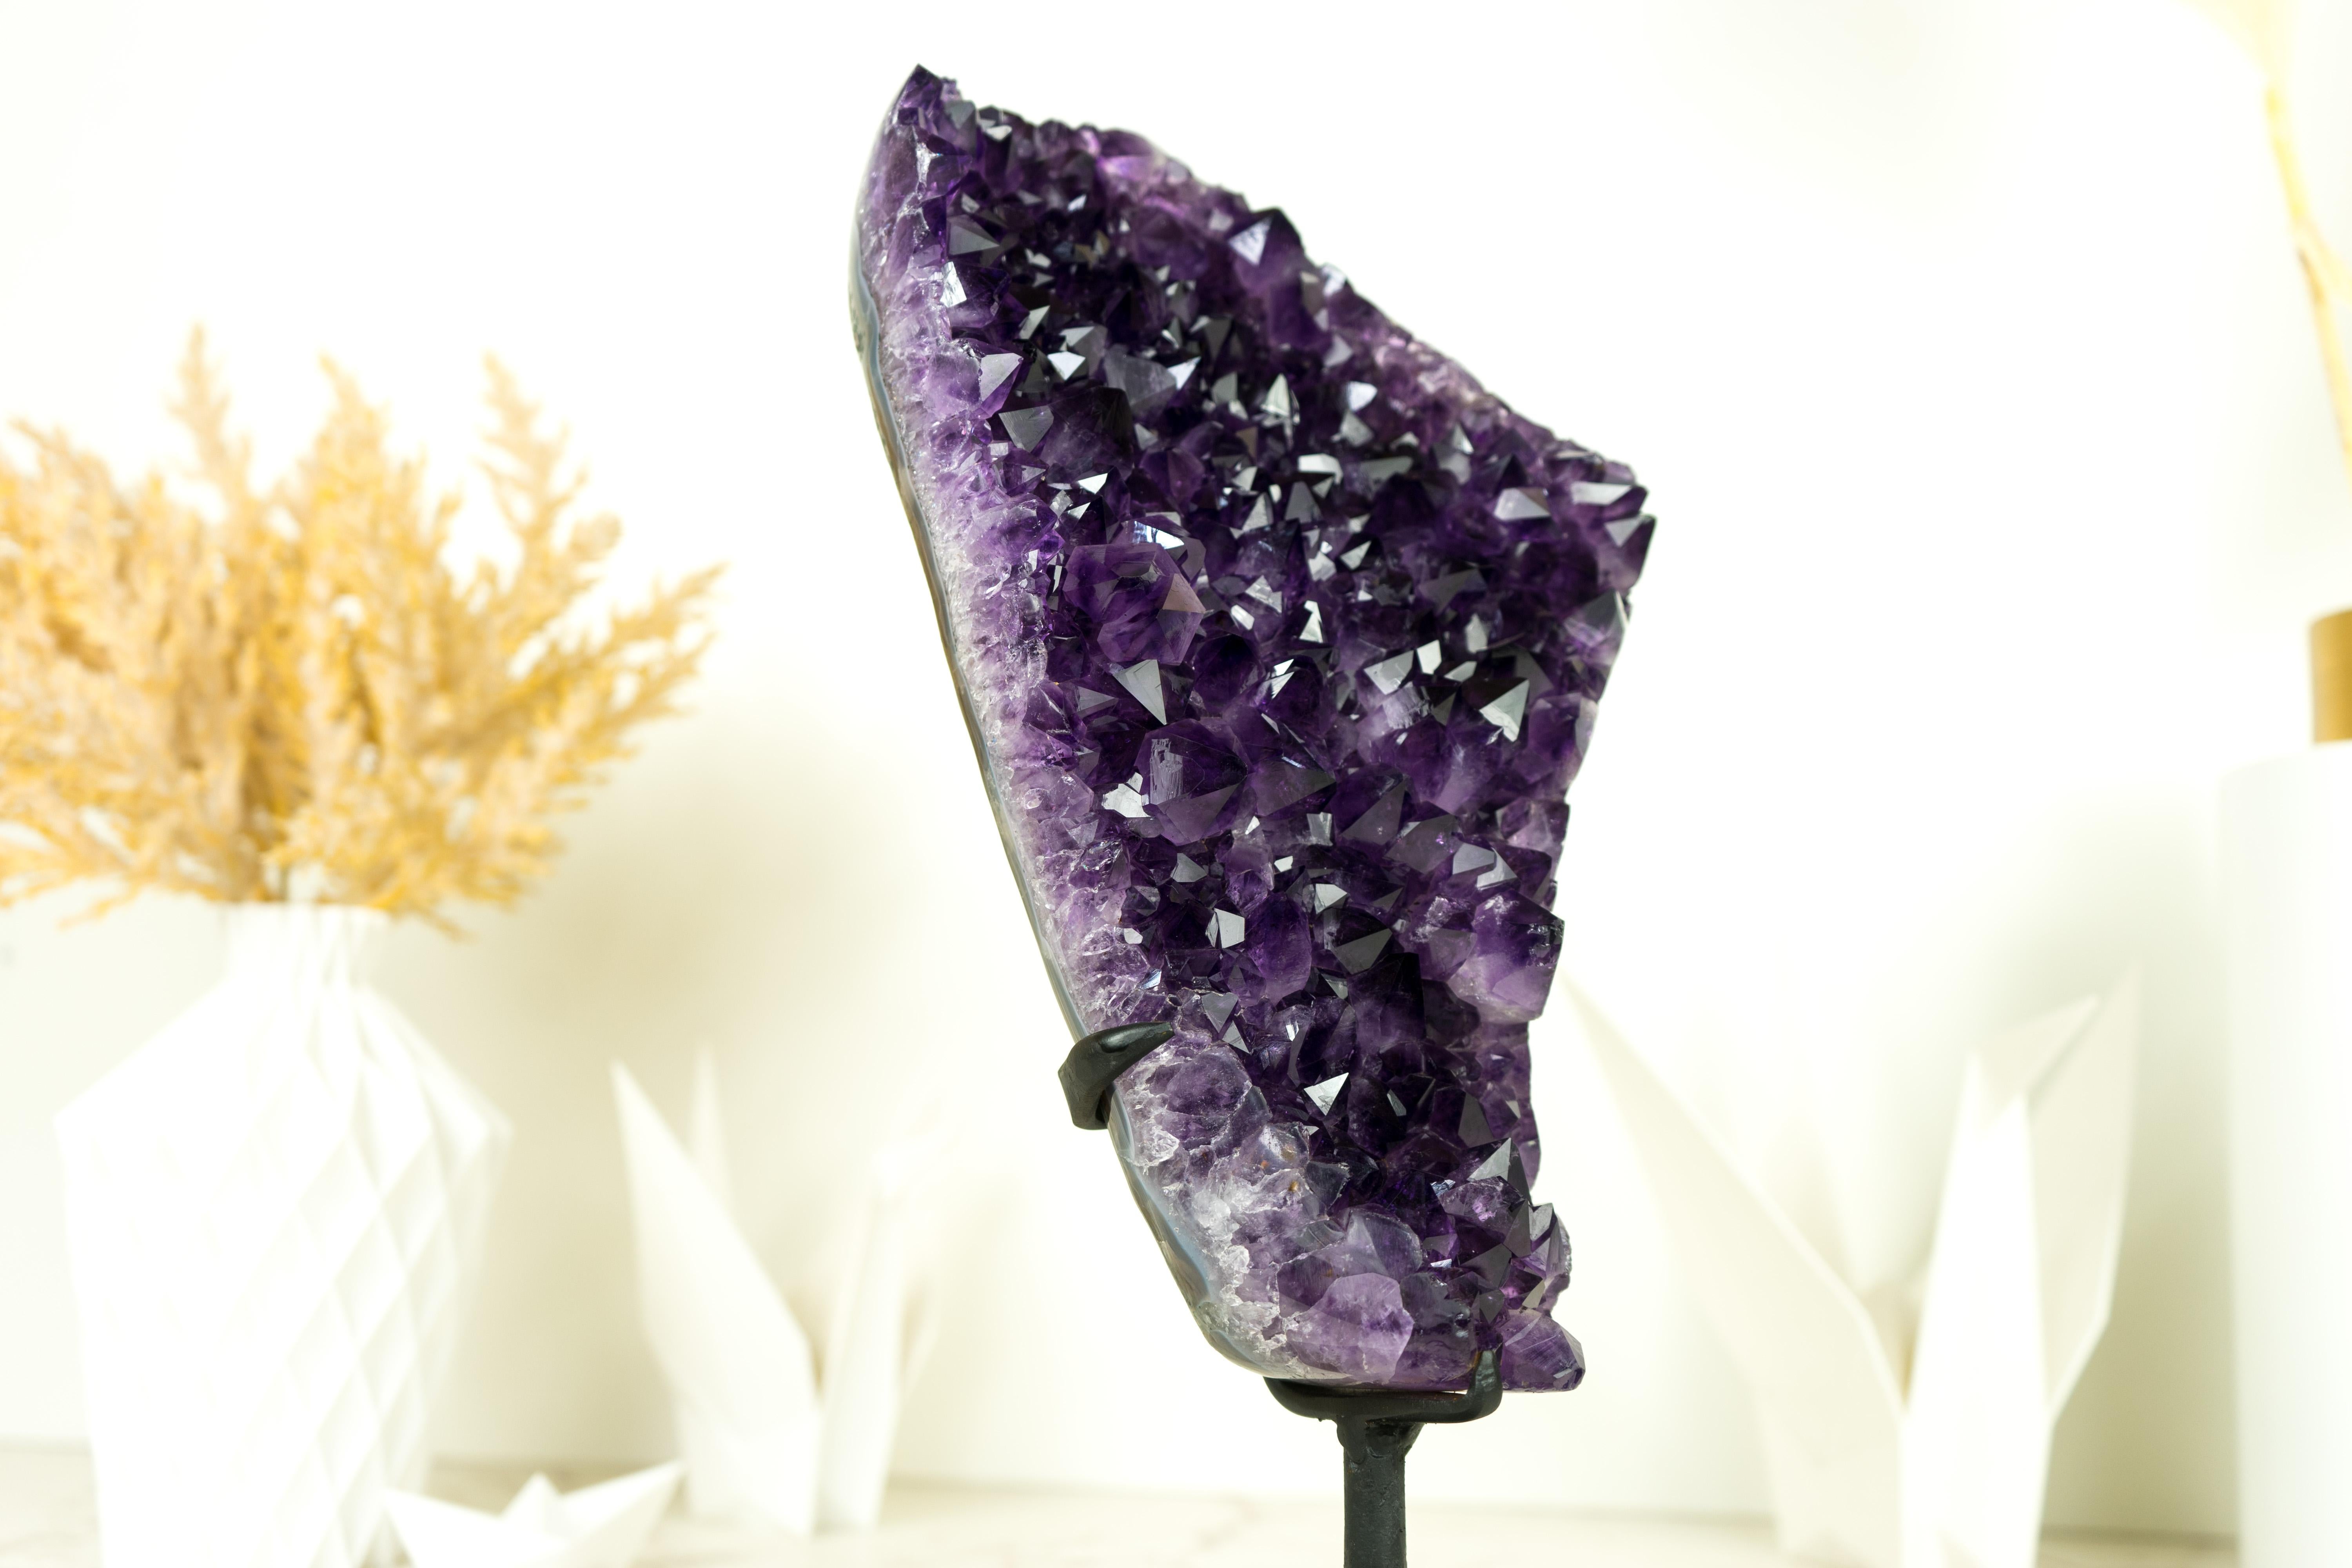 An extraordinary Amethyst Cluster that possesses world-class characteristics. Its deep, rich purple tone is the epitome of beauty and elegance, making it a standout centerpiece for any collection or home decor. This remarkable Amethyst radiates a